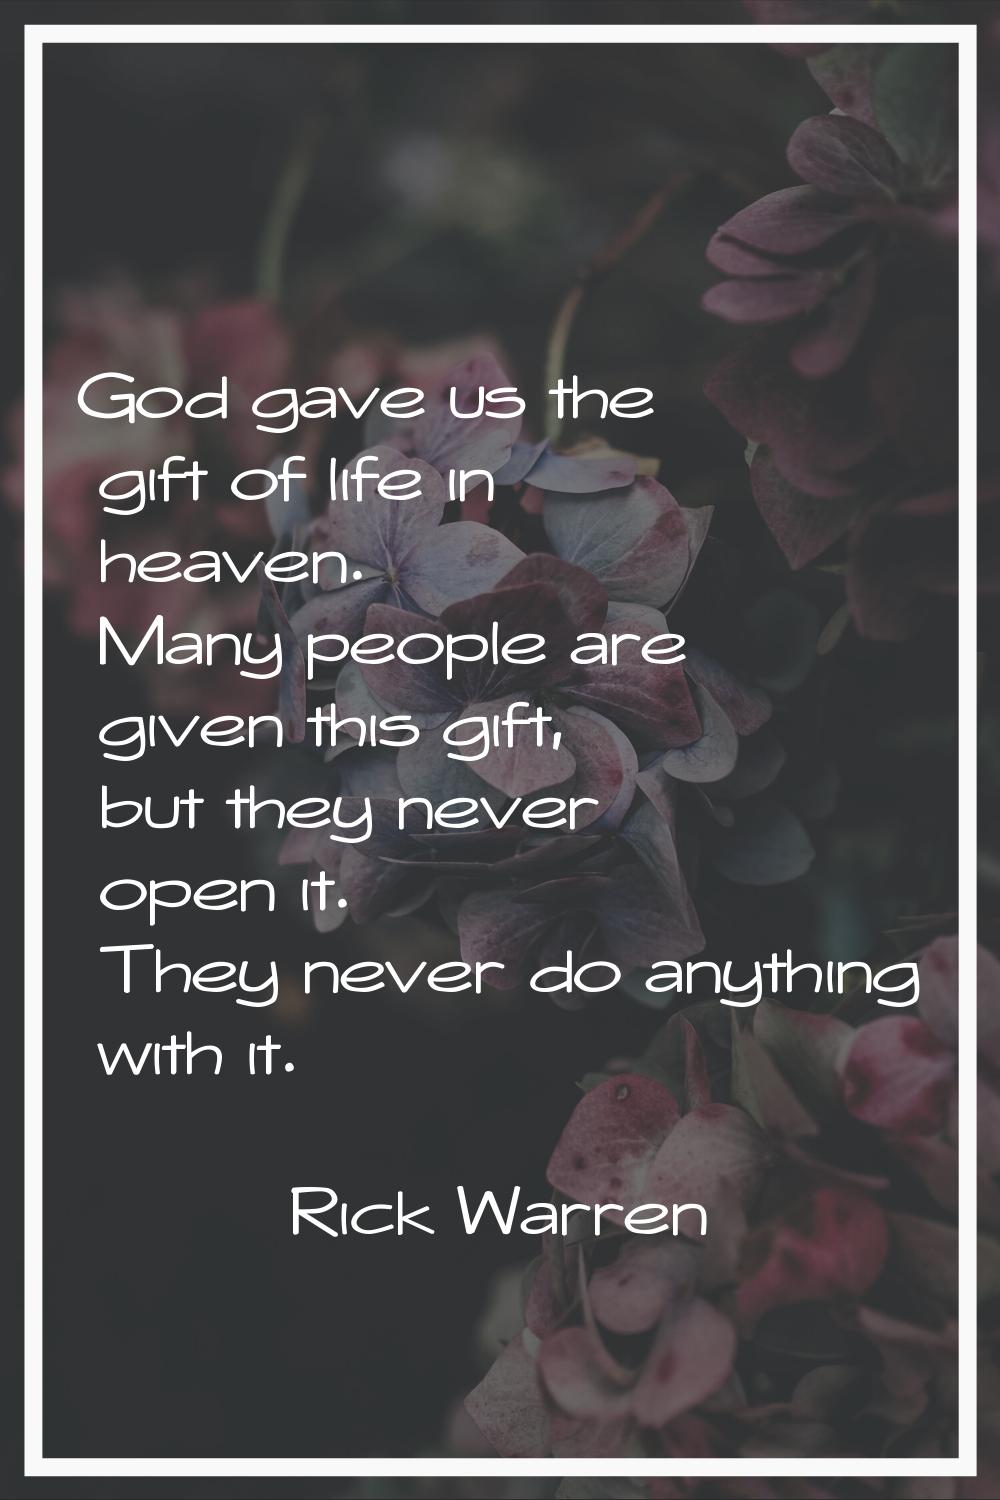 God gave us the gift of life in heaven. Many people are given this gift, but they never open it. Th